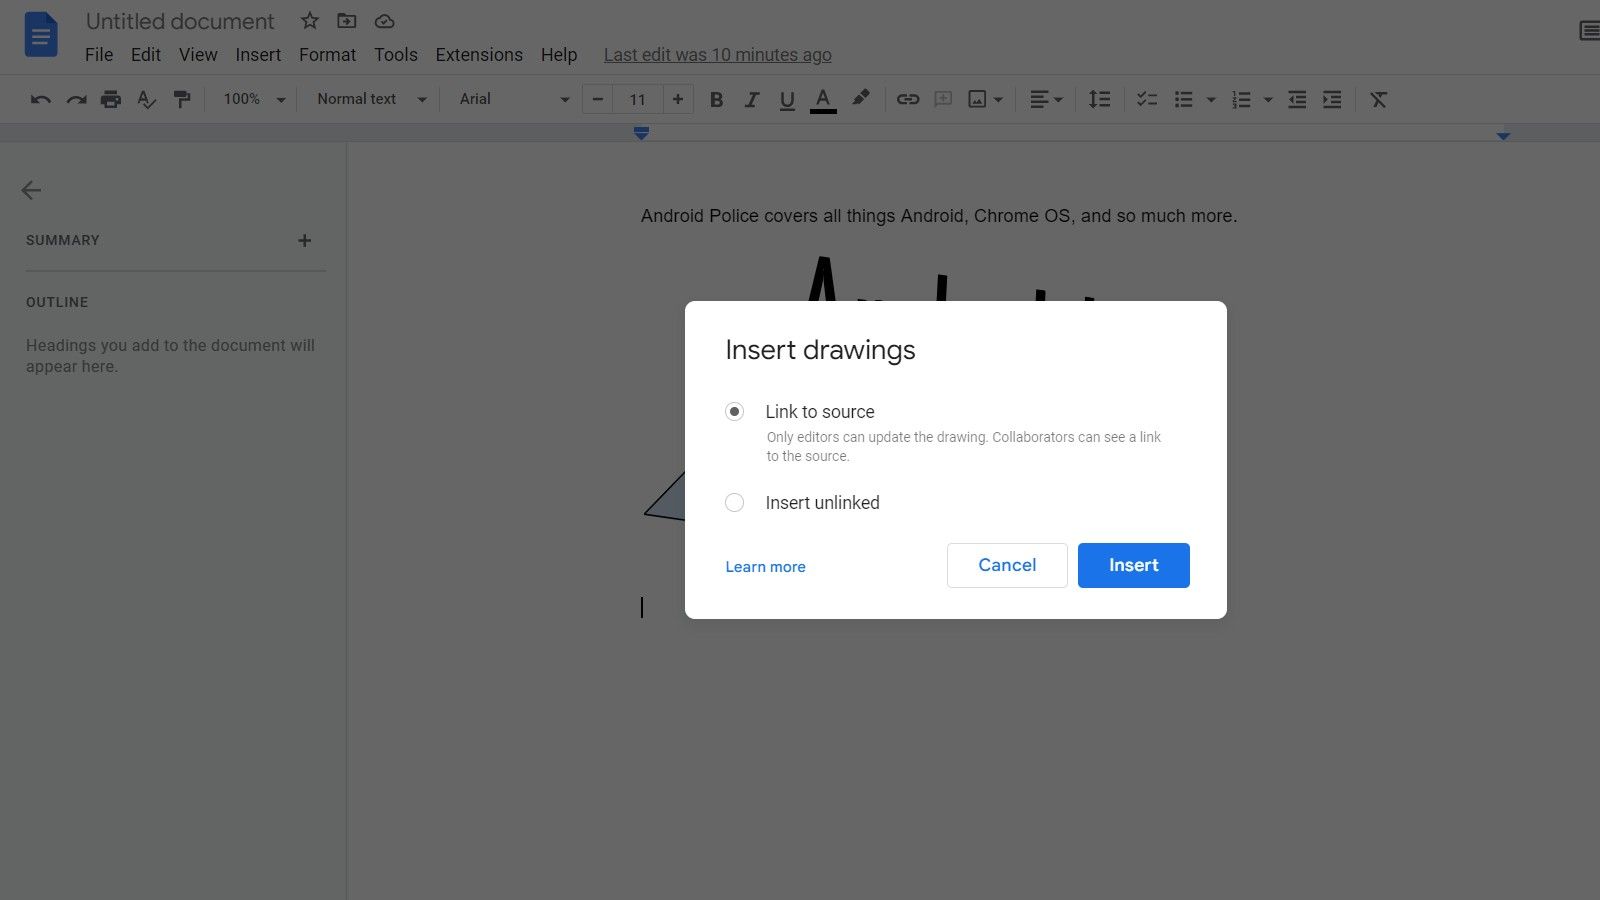 Choose how to insert the drawing, either linked or unlinked, into a Google Docs document